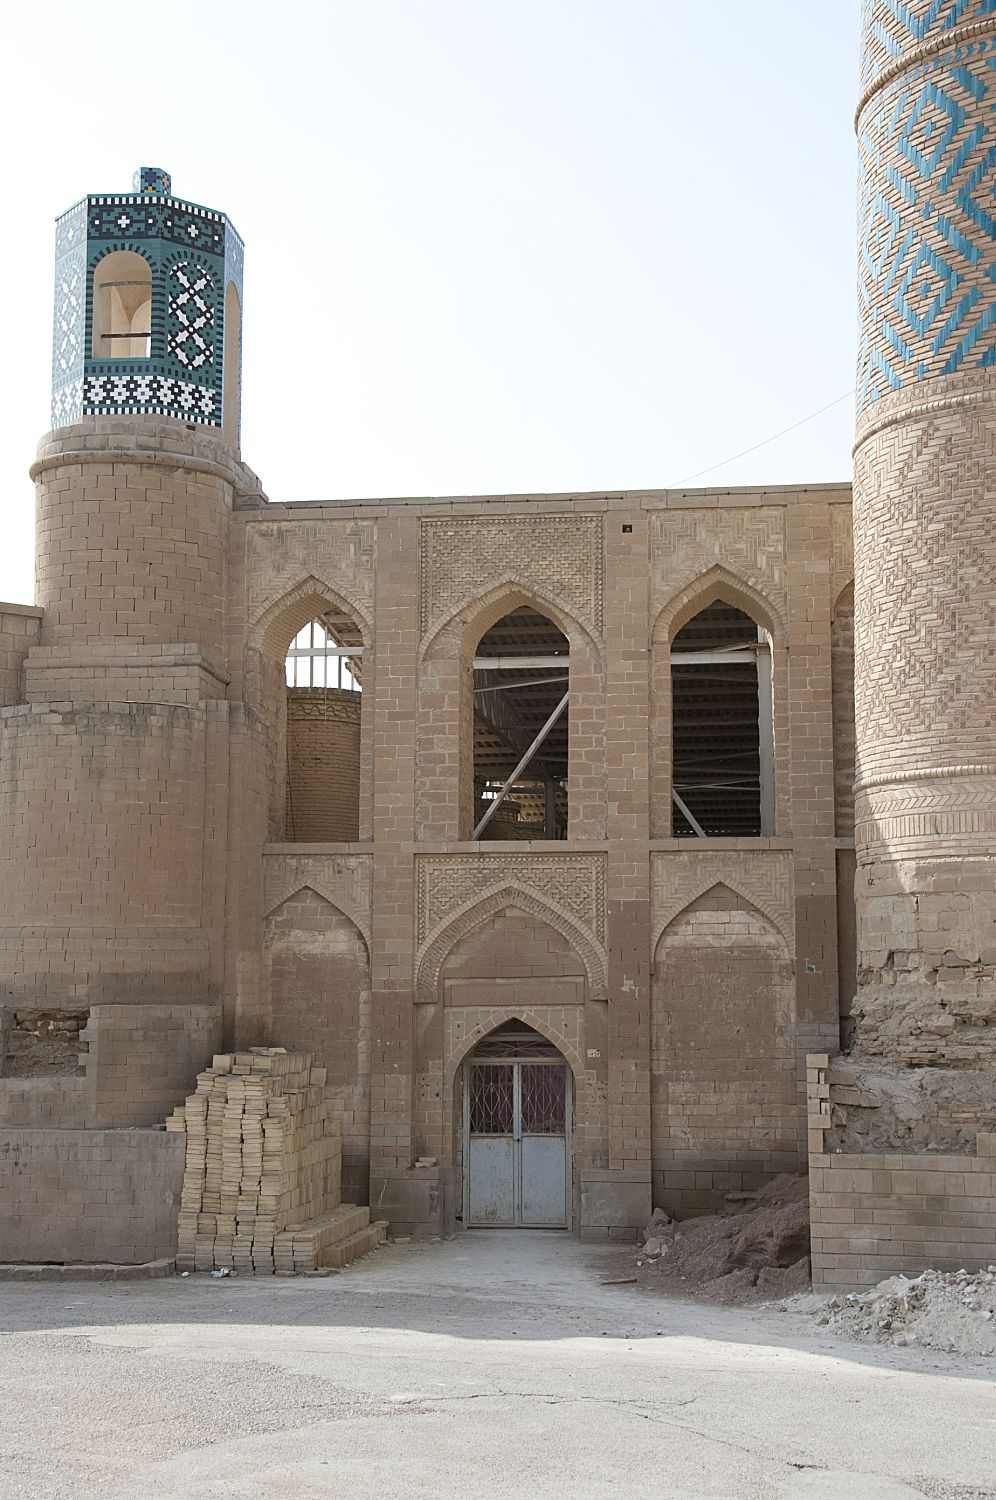 Entrance under construction on southeastern wall.